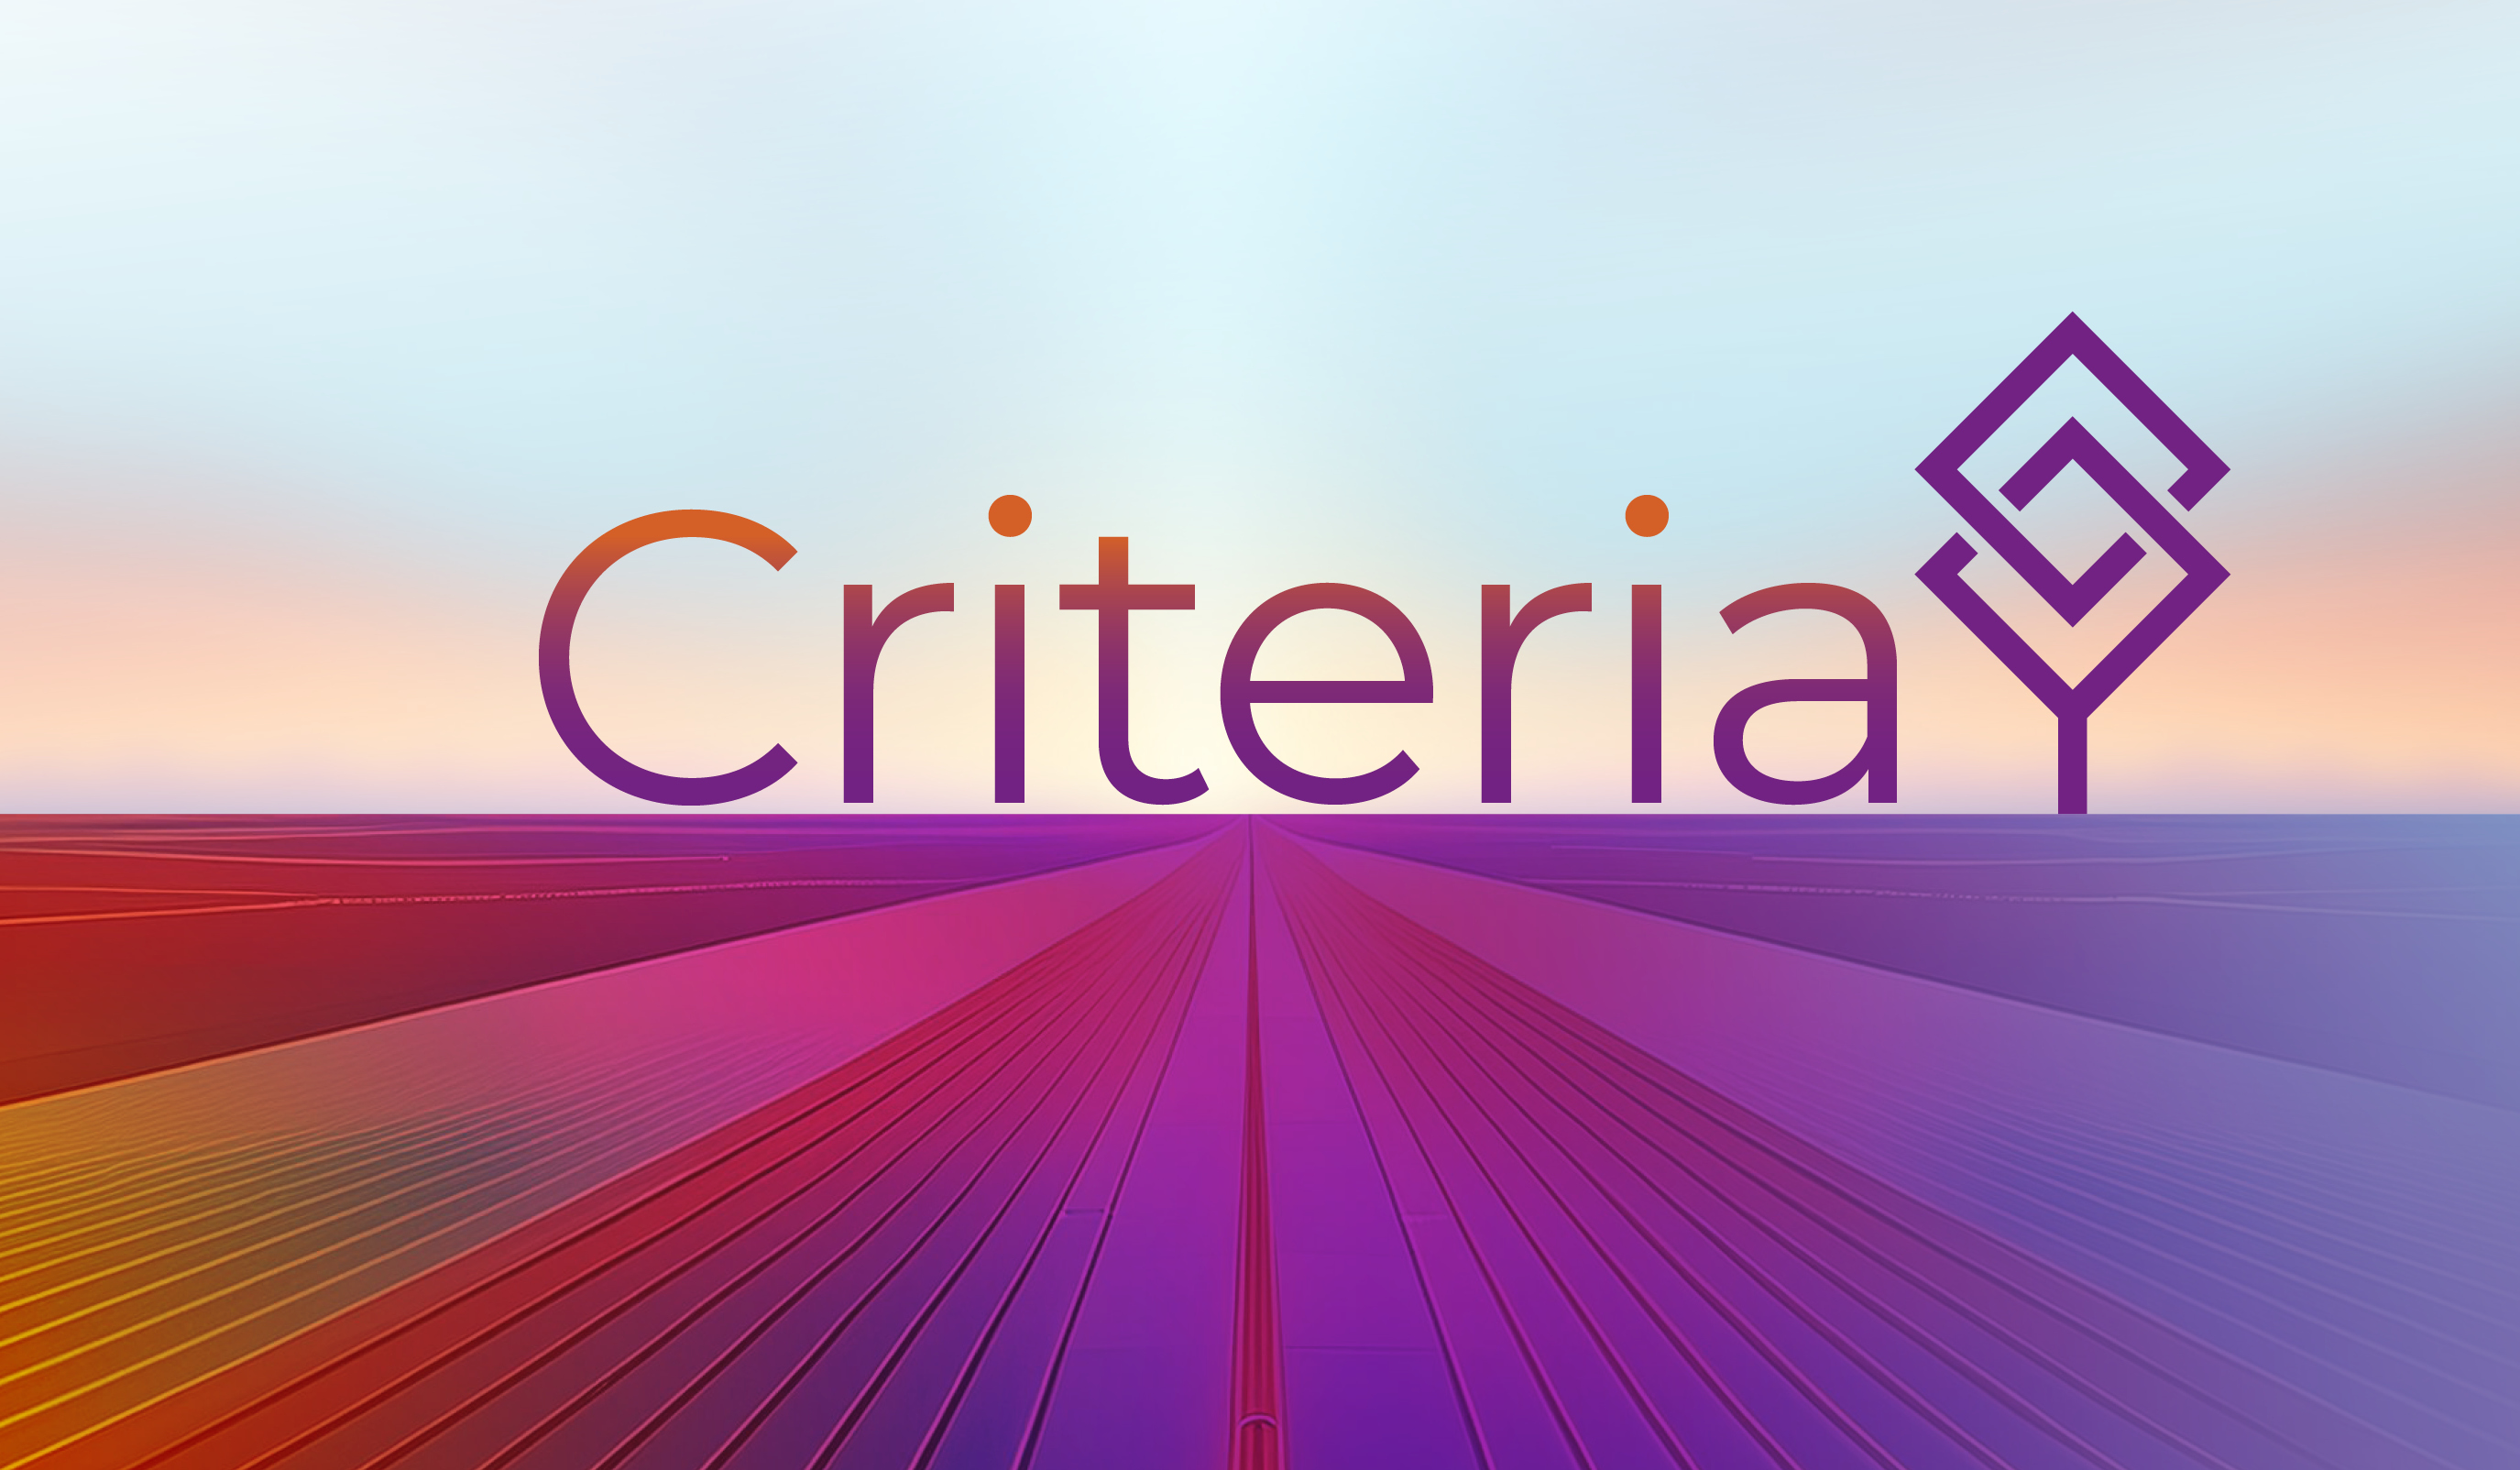 "Criteria" on a colorful horizon with HLC logo